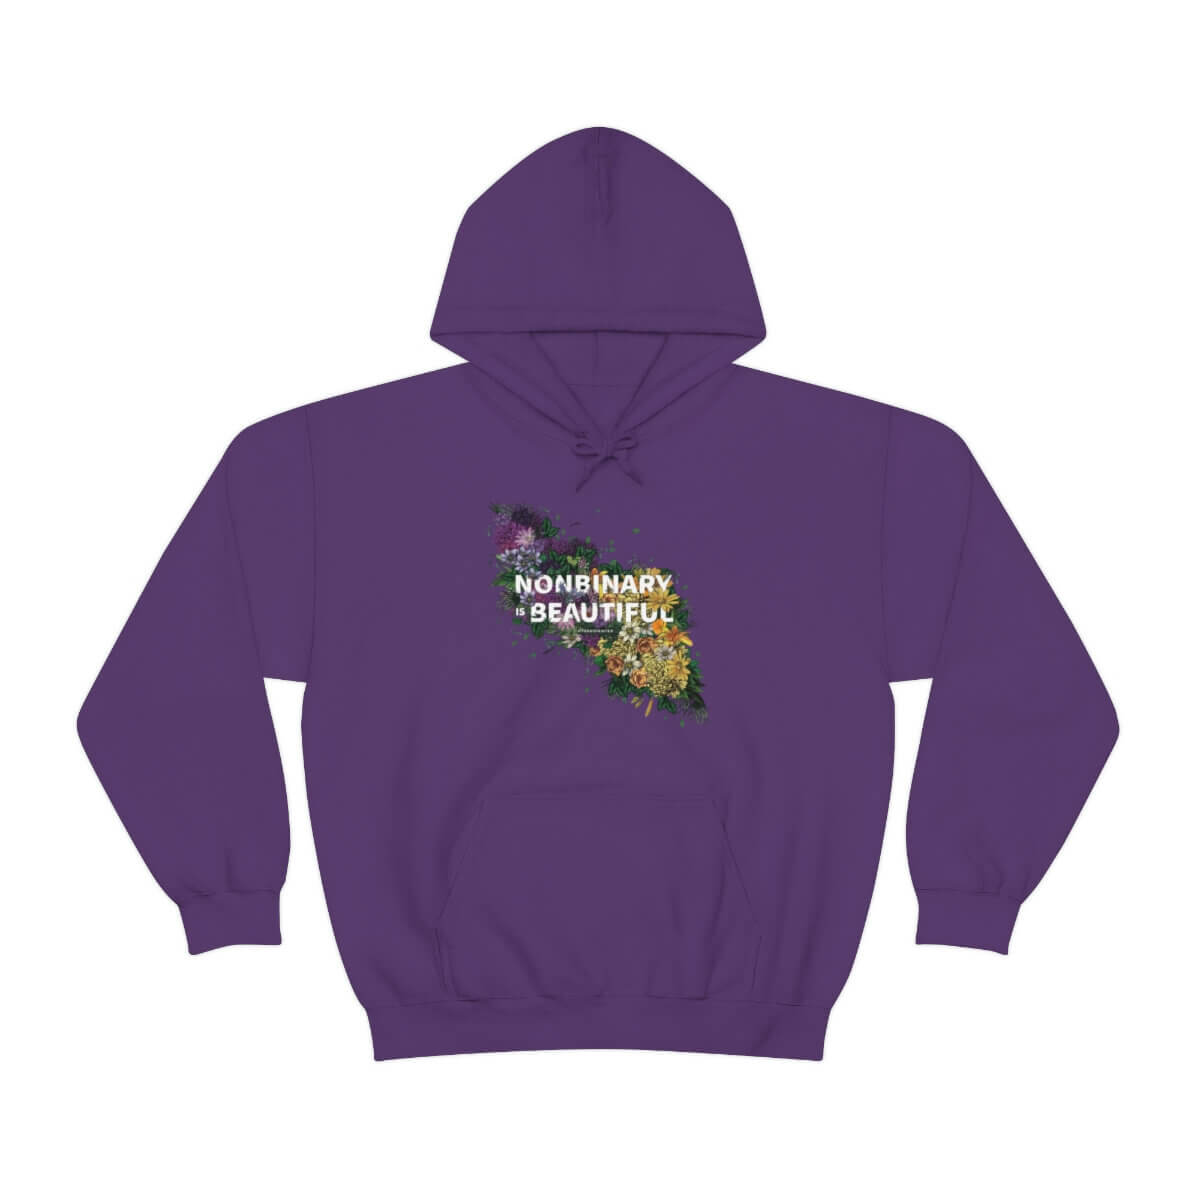 Nonbinary is beautiful hoodie. Purple hooded sweatshirt printed with flowers and the phrase Nonbinary is Beautiful